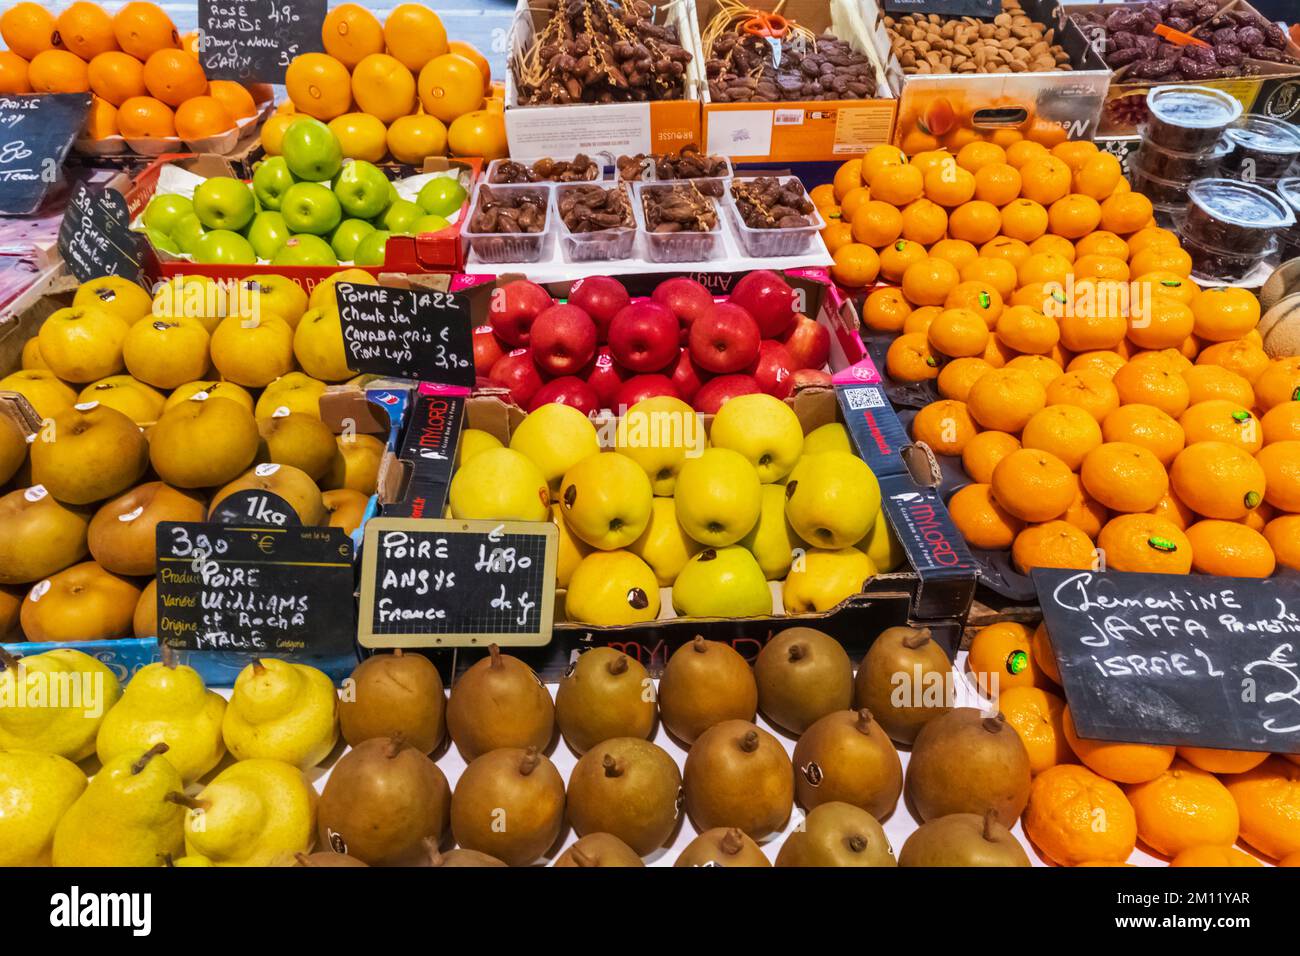 France, French Riviera, Cote d'Azur, Cannes, Forville Market, Fruit Stall Display Stock Photo